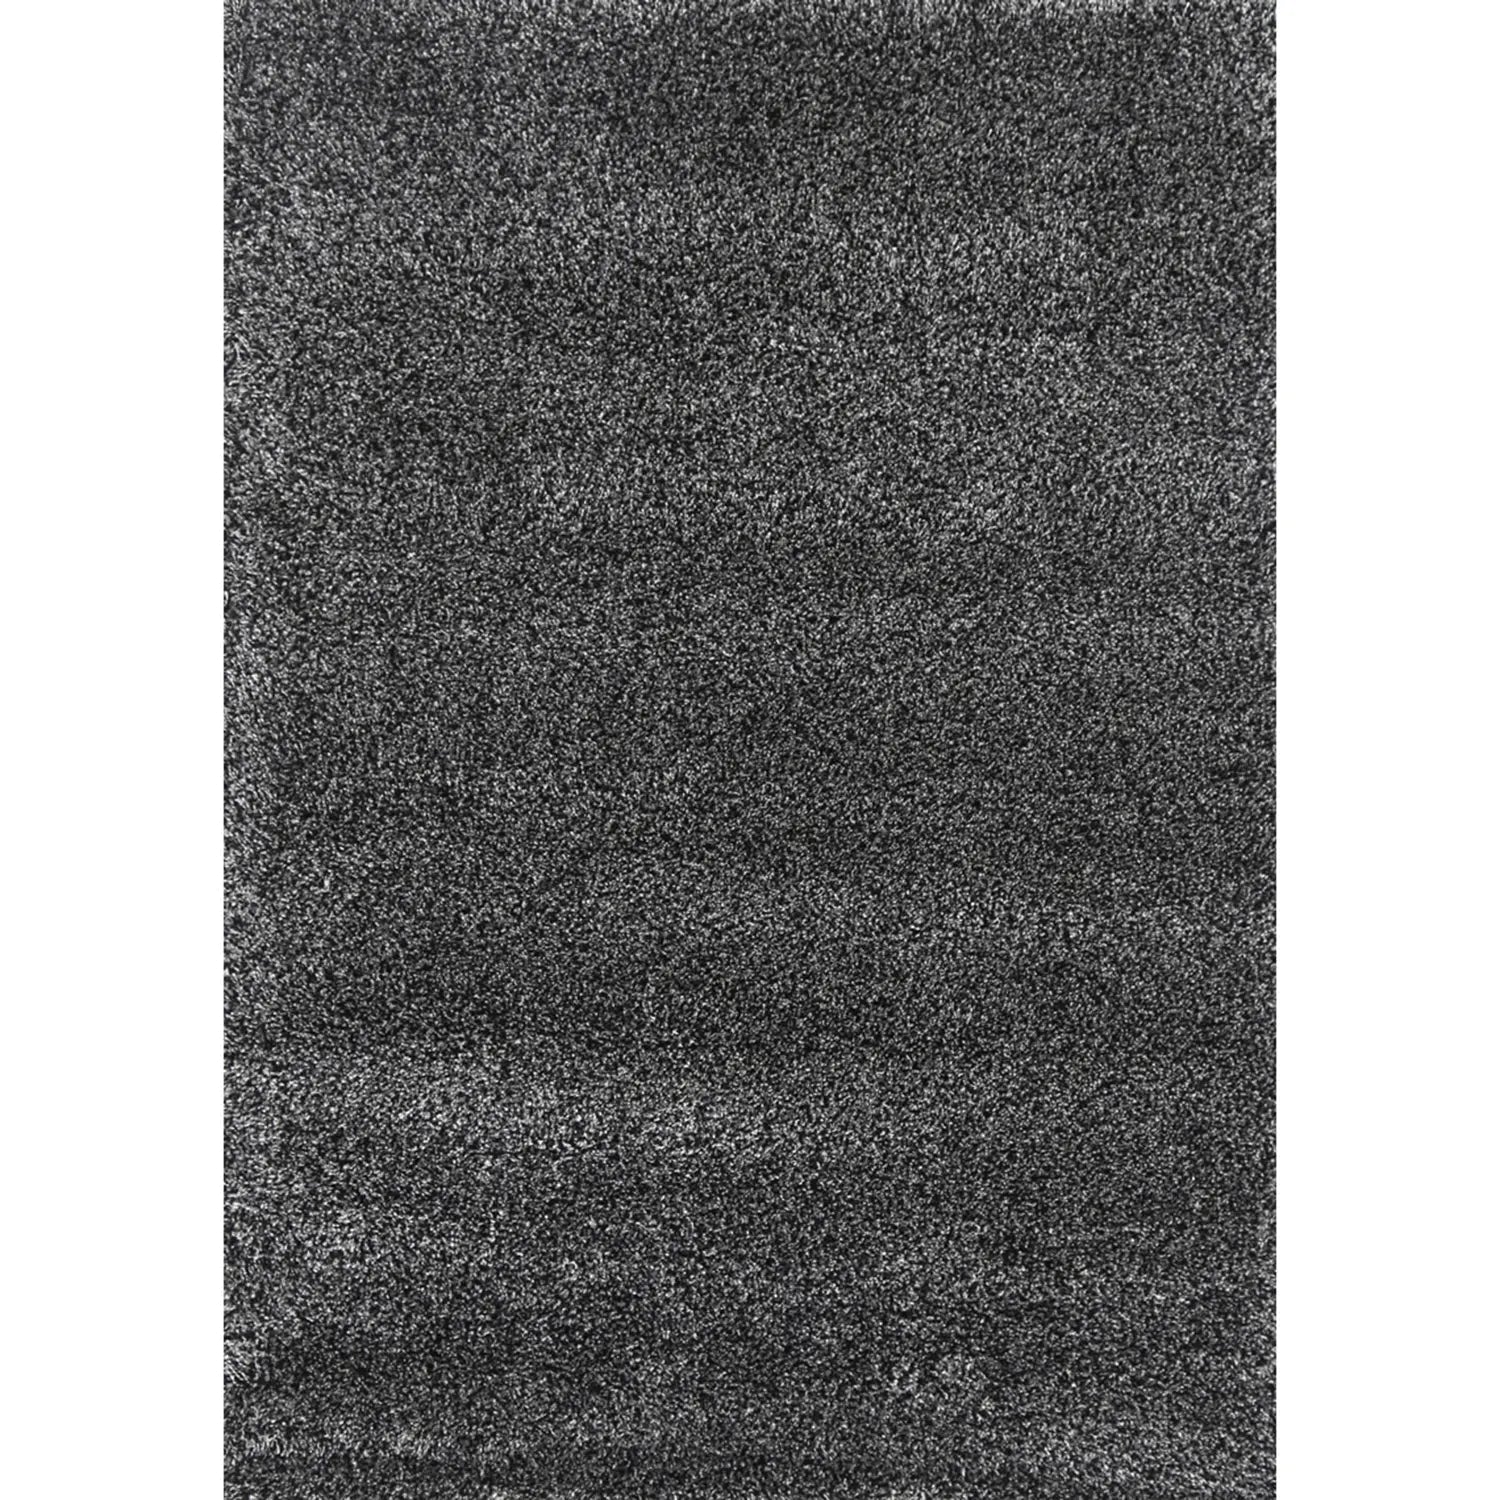 Coco Black and White Shag Rug - Rugs - Rugs a Million